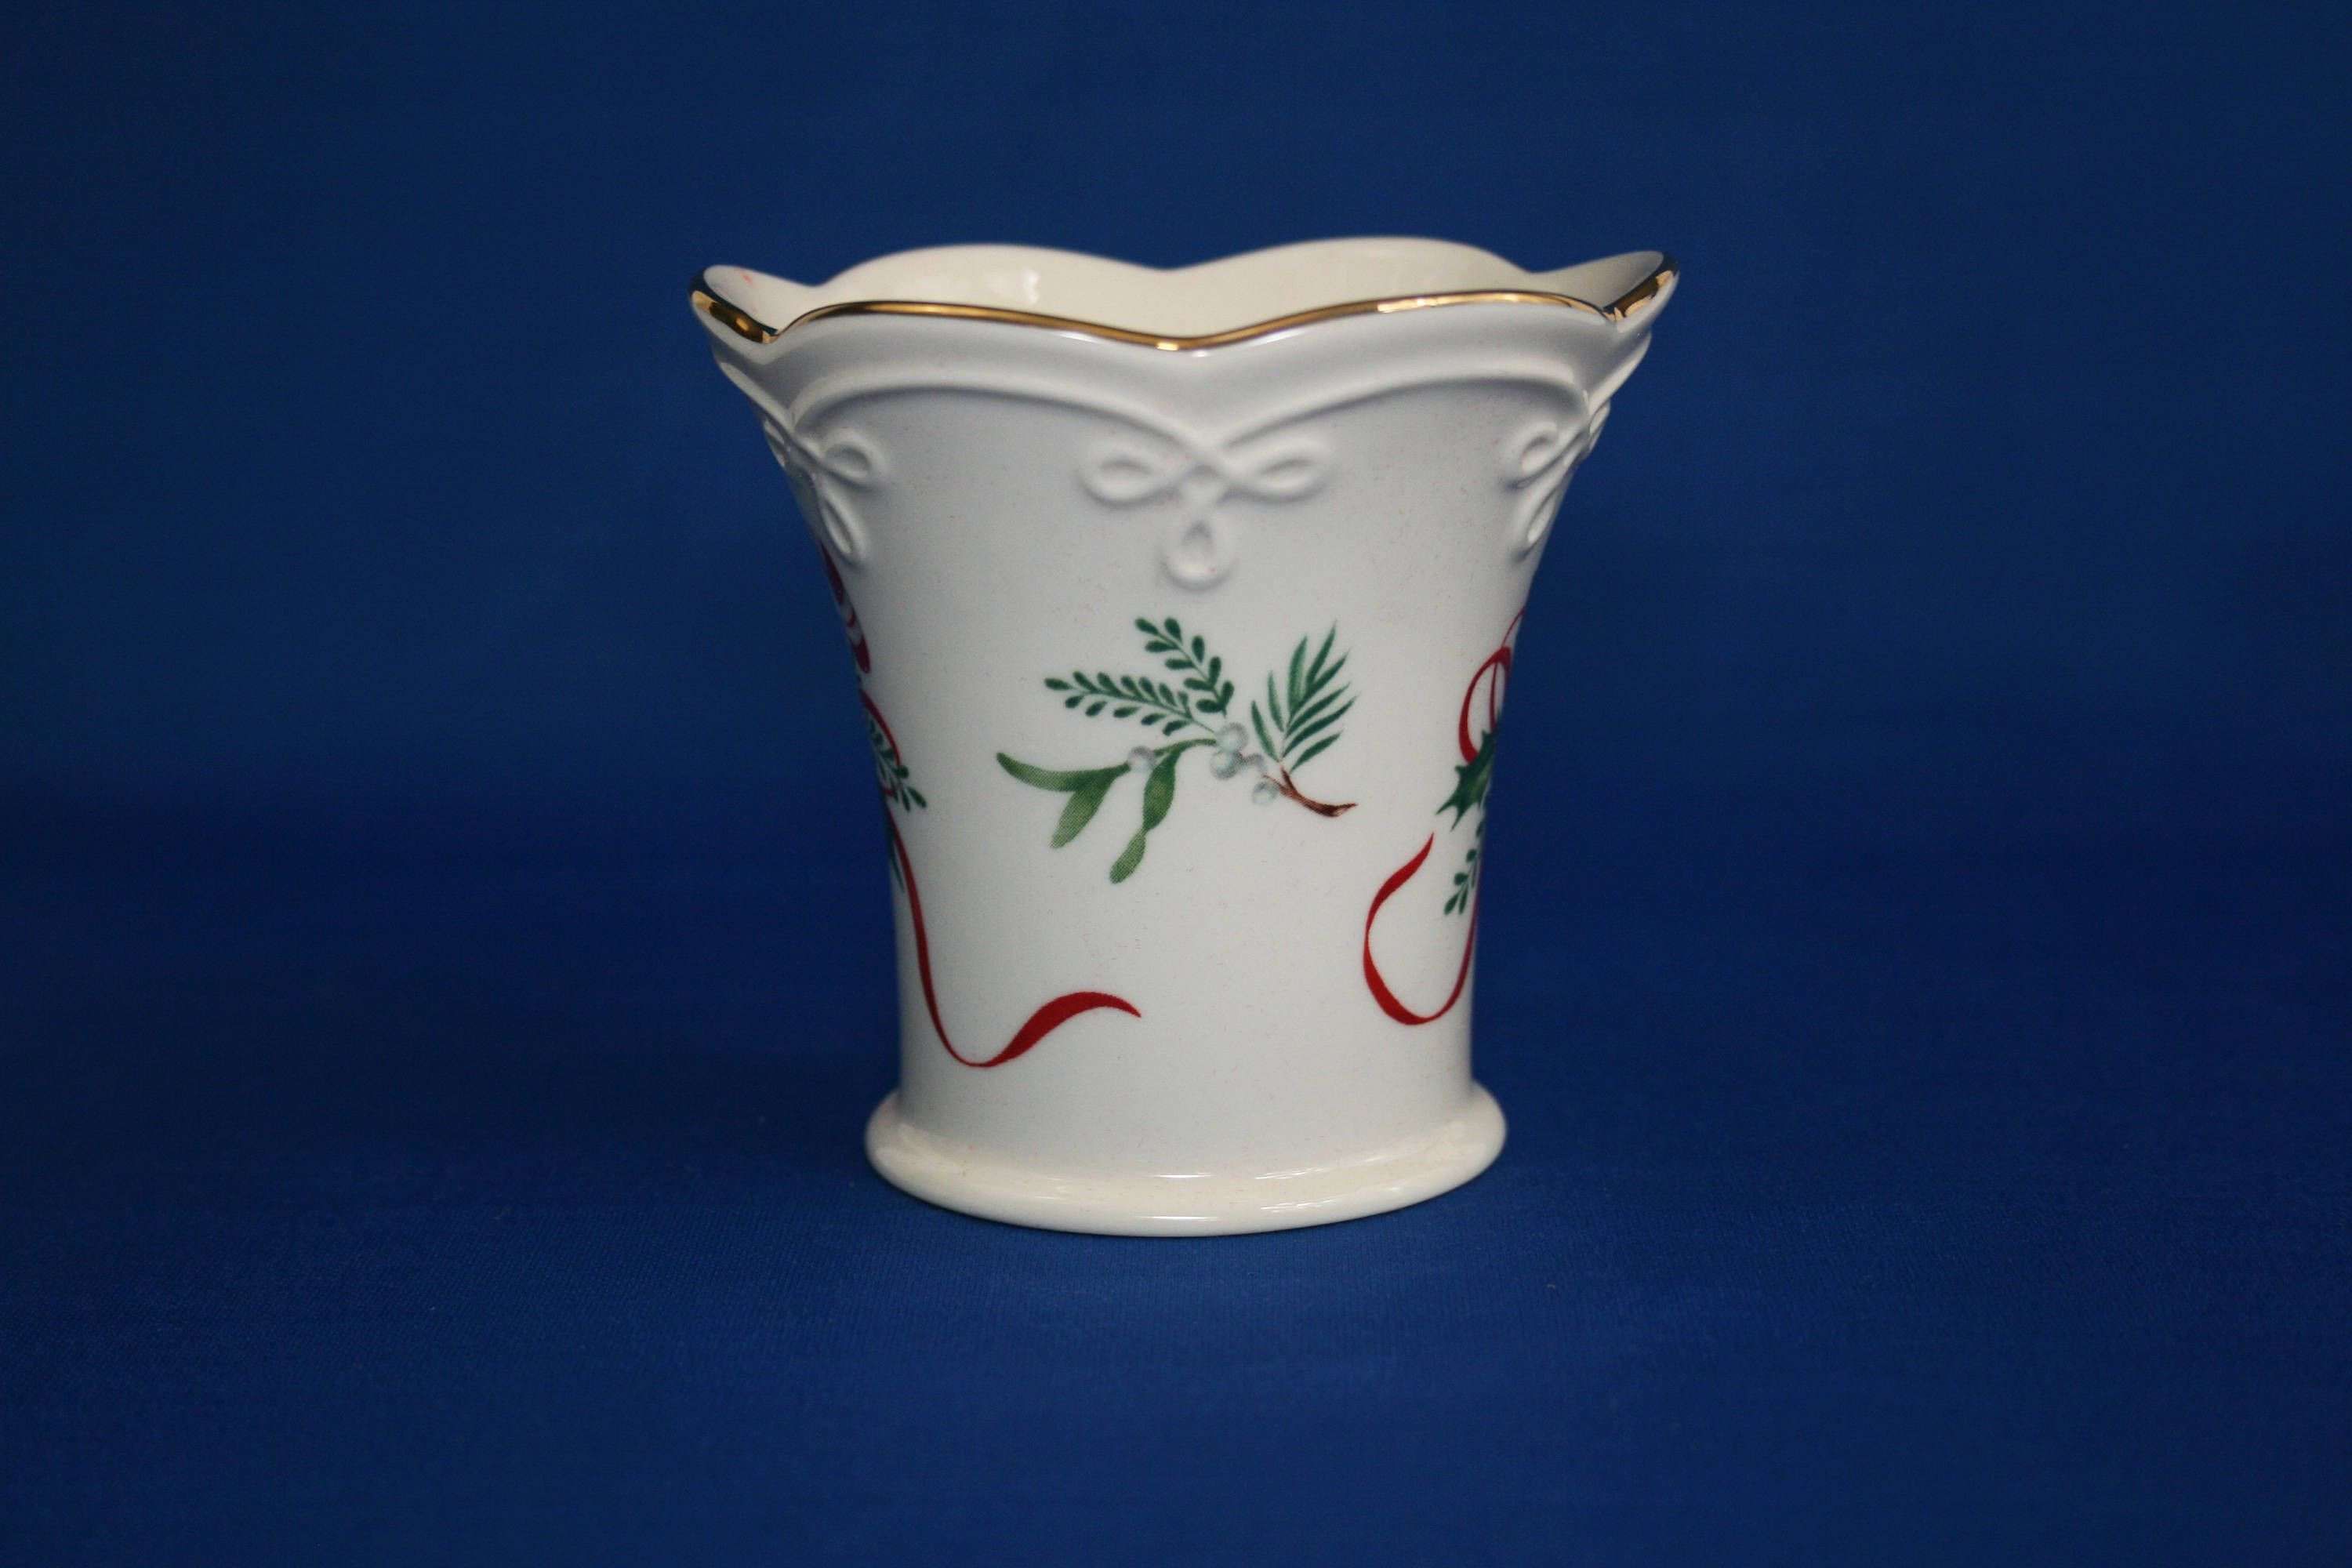 17 attractive Blue and White Floral Ceramic Vase 2024 free download blue and white floral ceramic vase of 26 lenox small vase the weekly world inside vintage lenox china candy cane tea light fluted cup candle holder